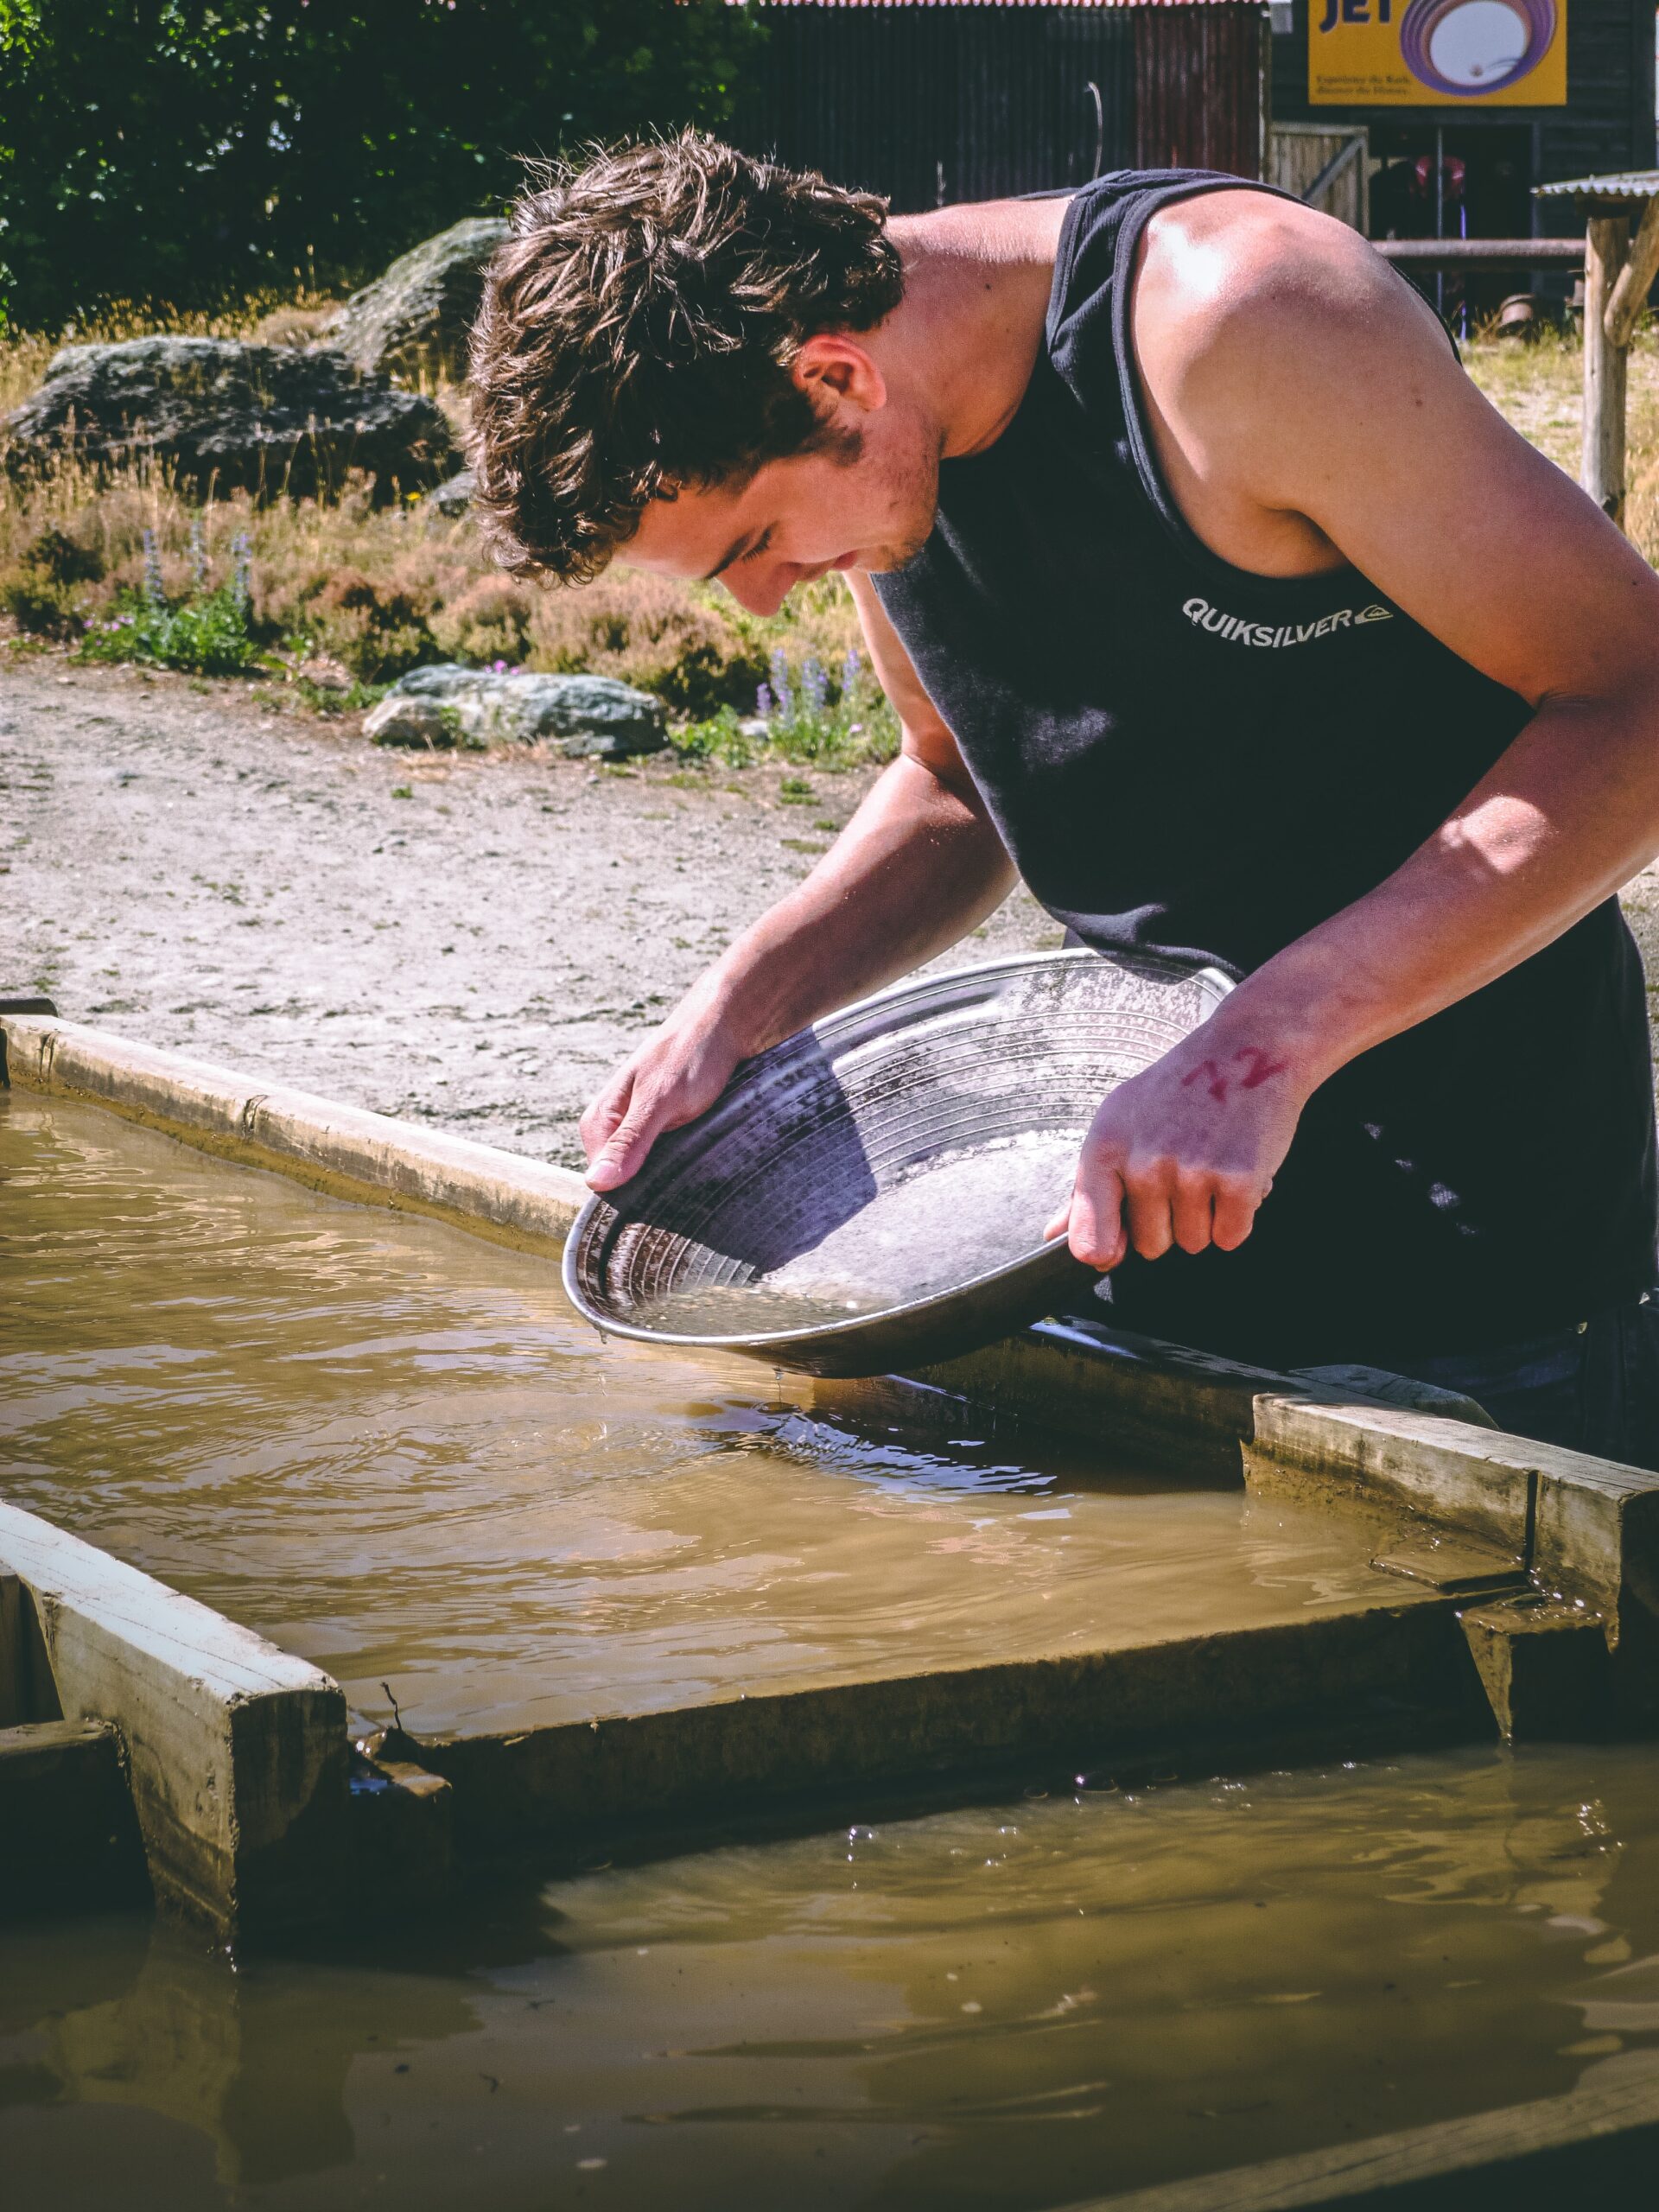 Man panning for gold